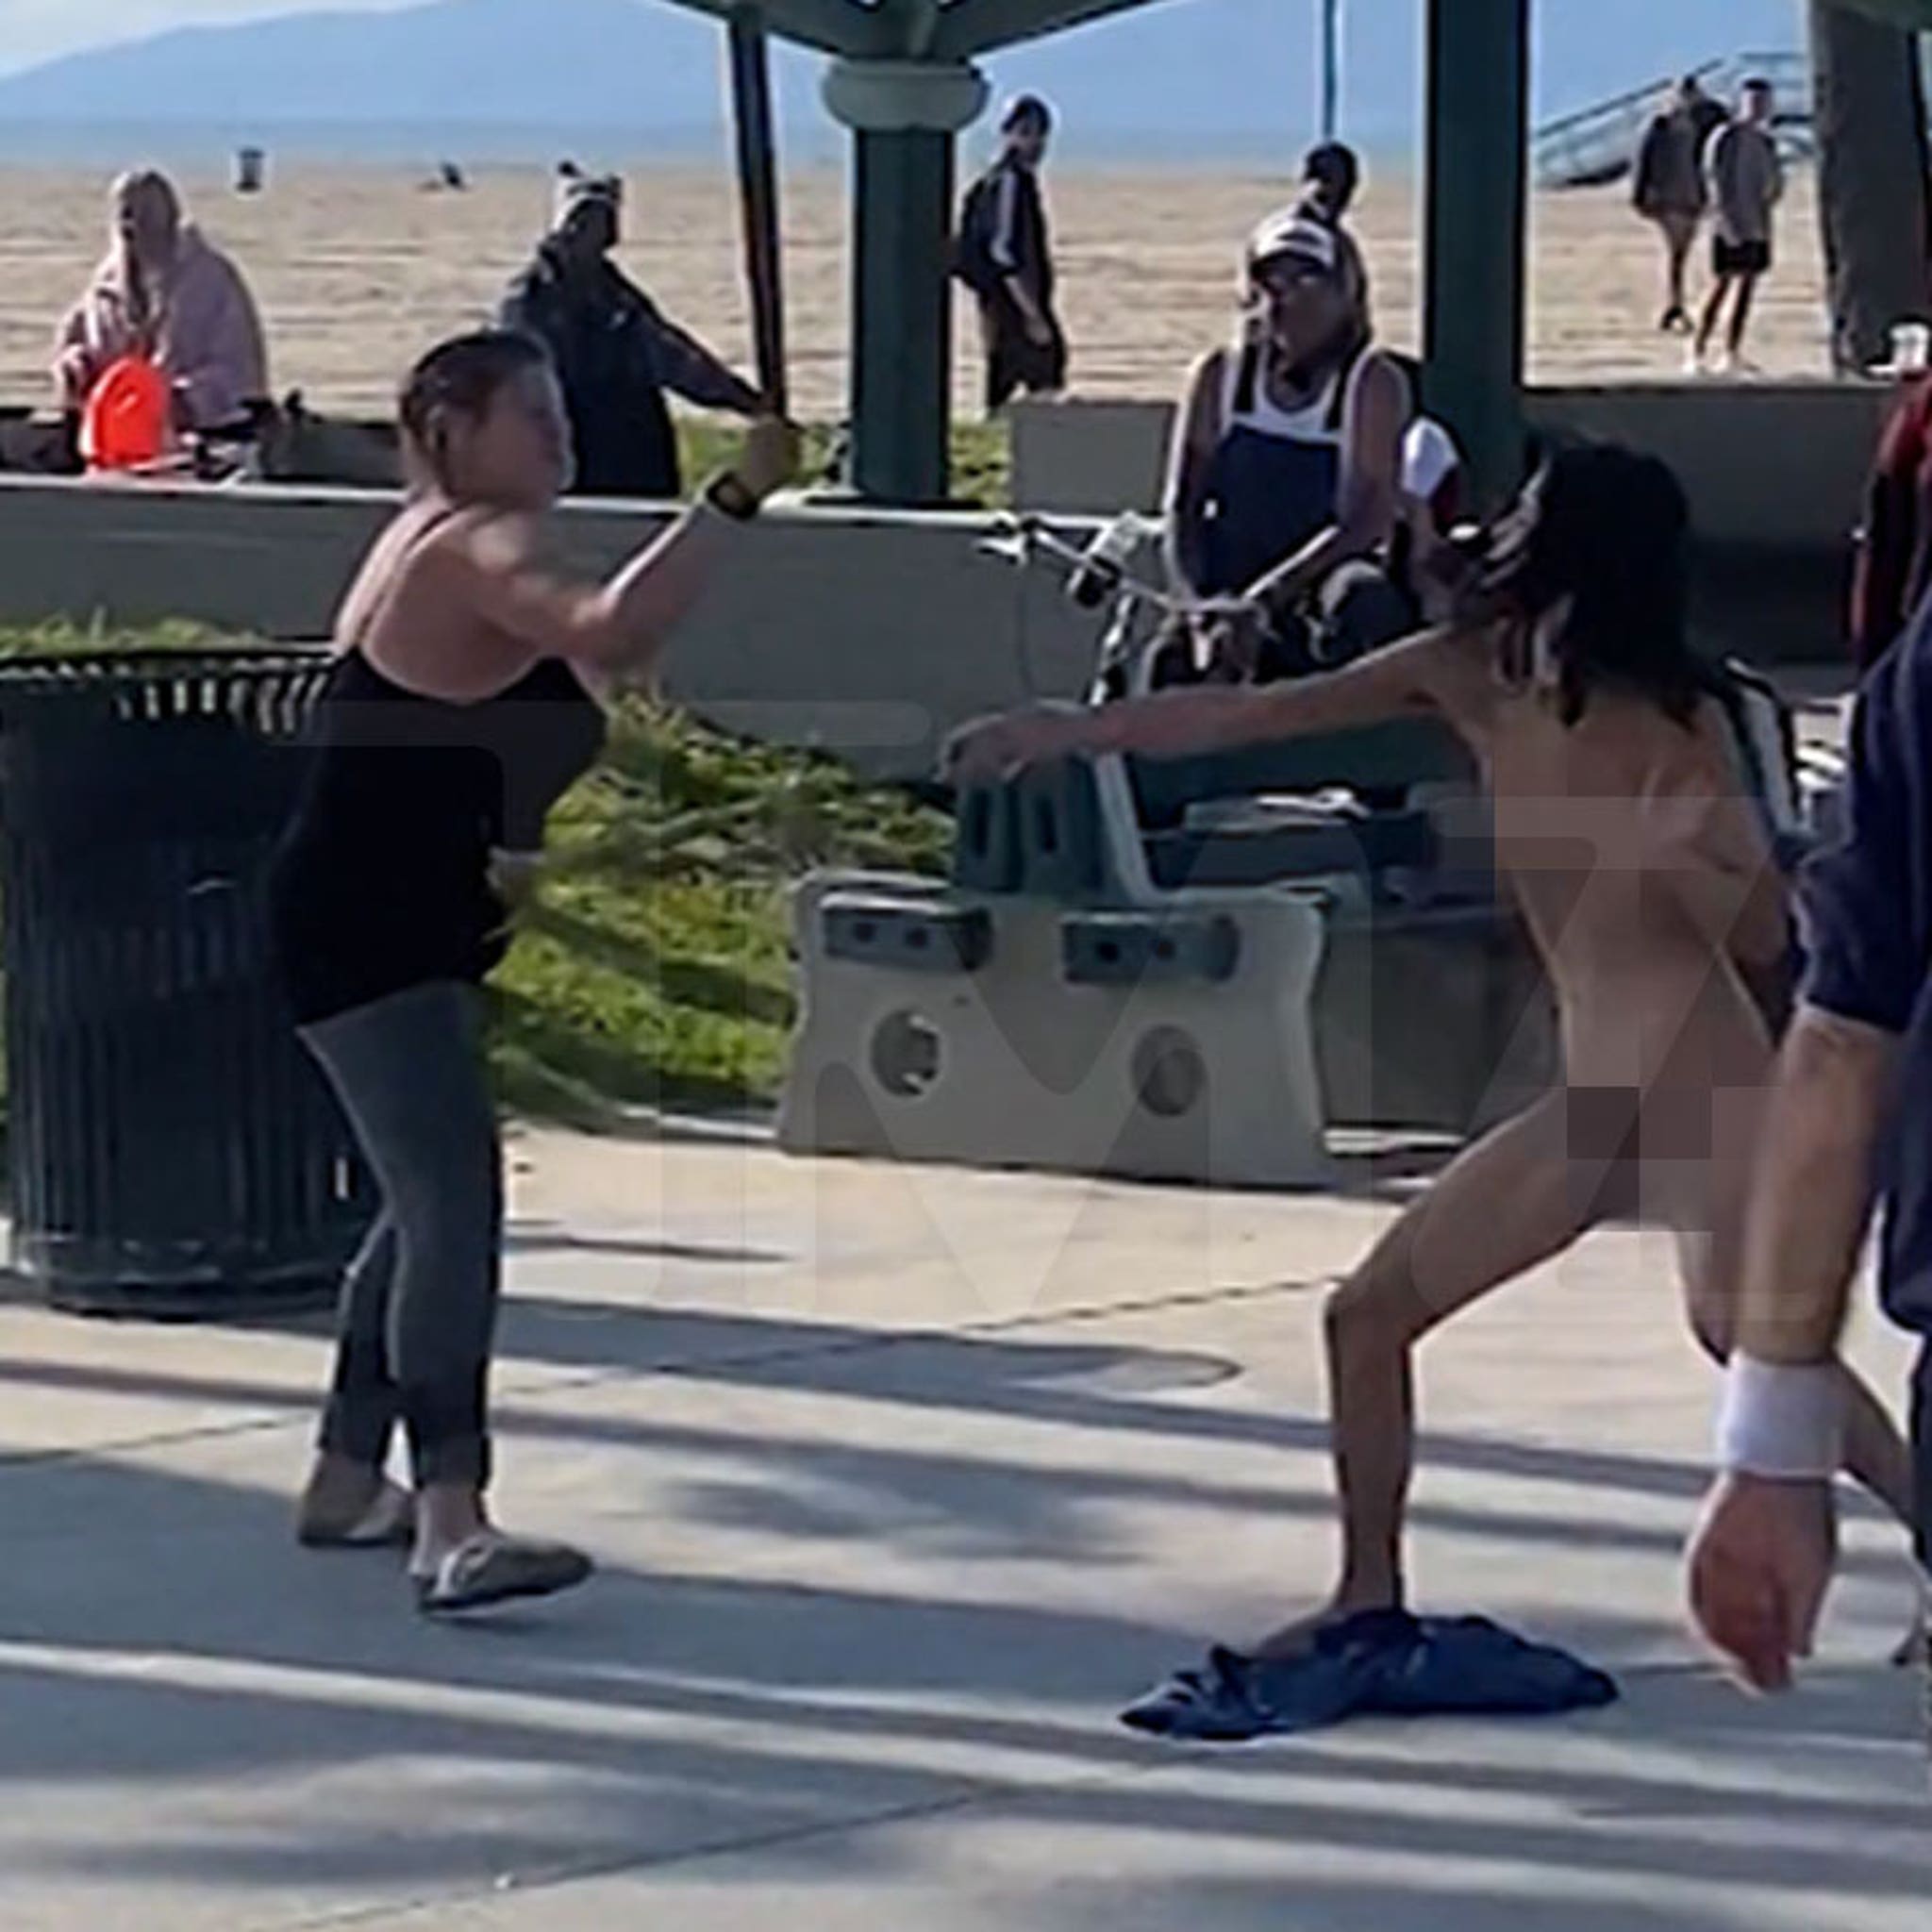 Naked Woman Gets Into Barbaric Fight in Venice Beach, Spiked Clubs Used